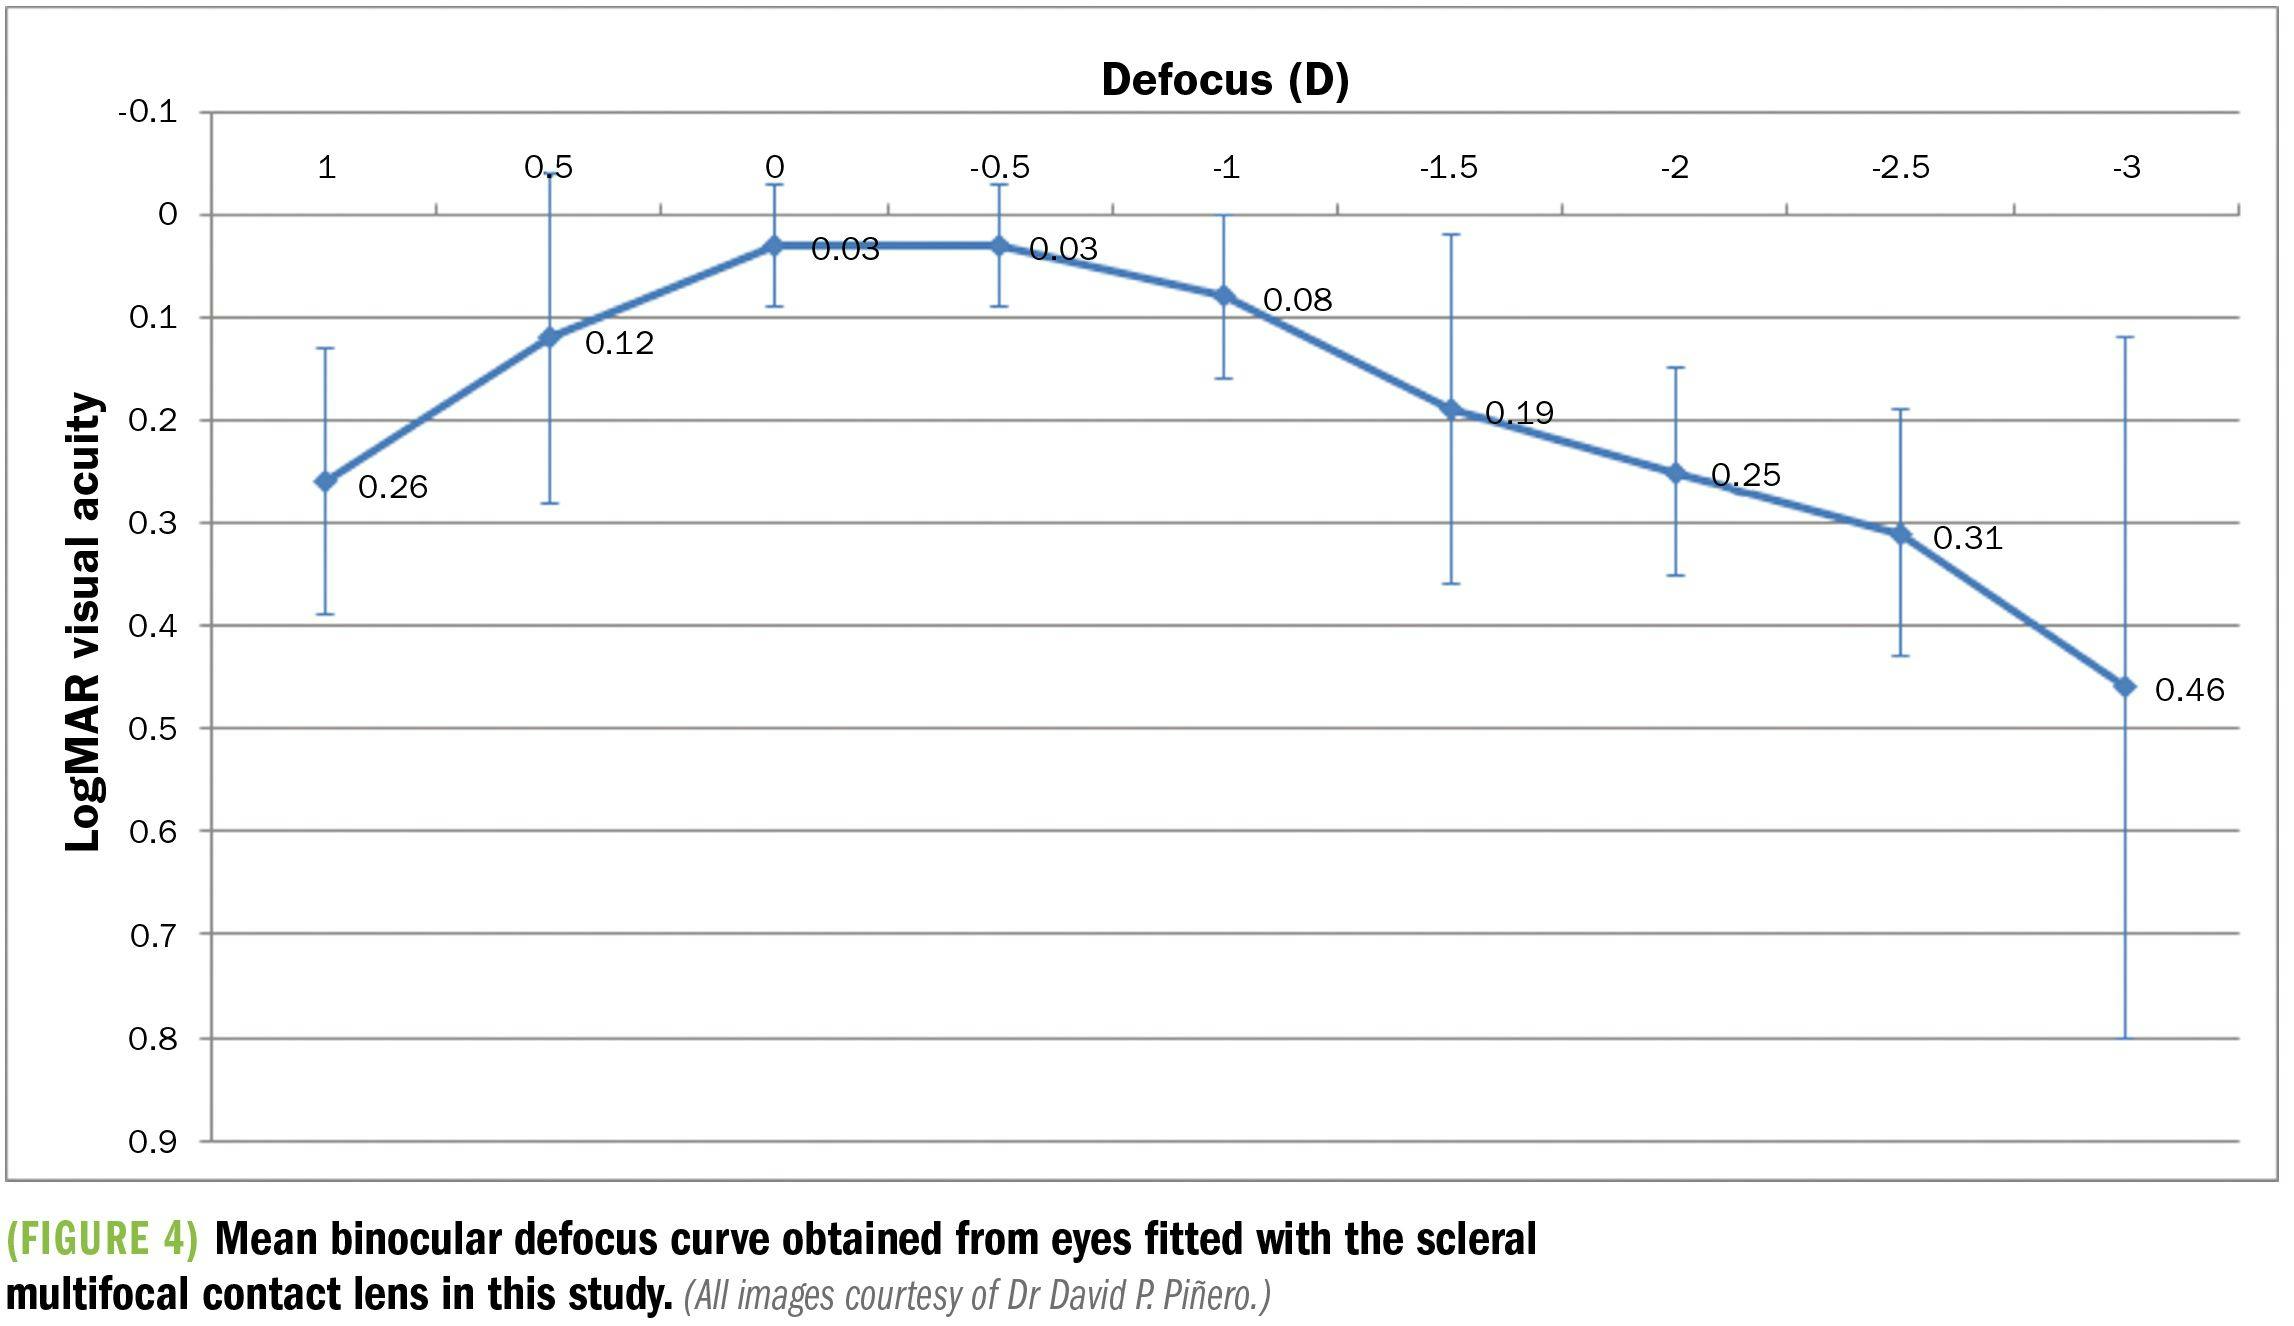 Mean binocular defocus curve obtained from eyes fitted with the scleral multifocal contact lens in this study